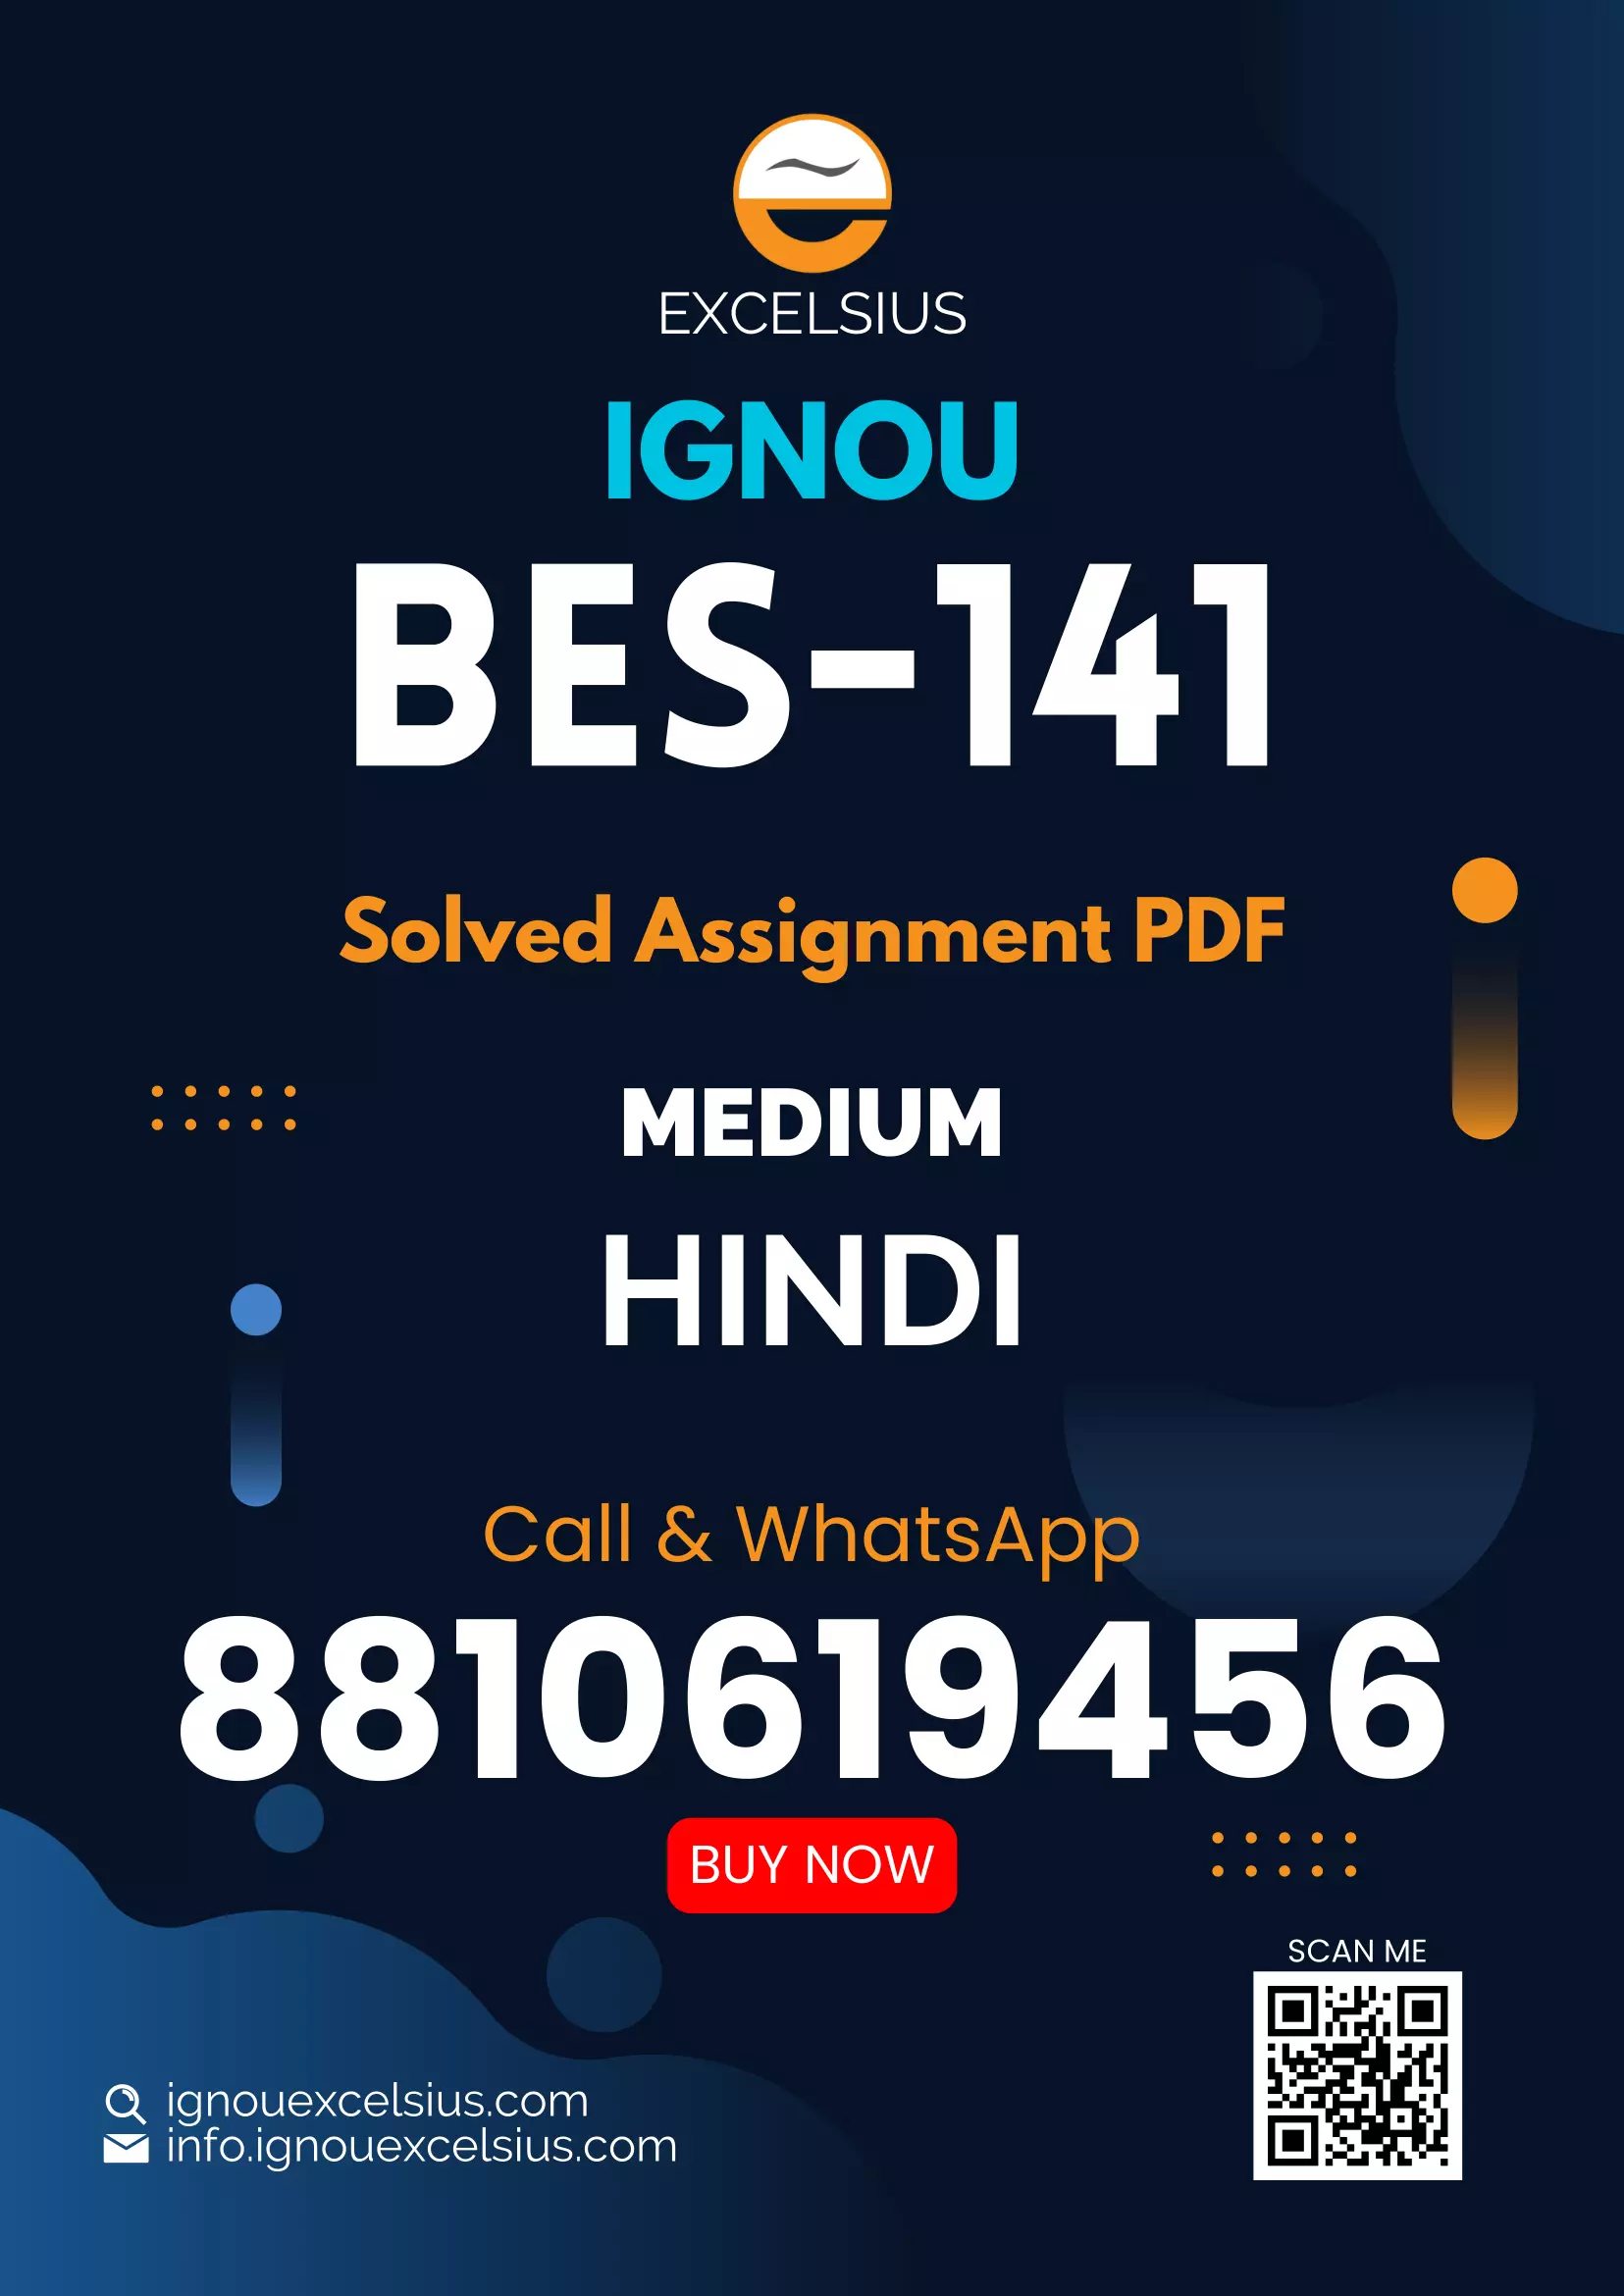 IGNOU BES-141 - Pedagogy of Science, Latest Solved Assignment-January 2022